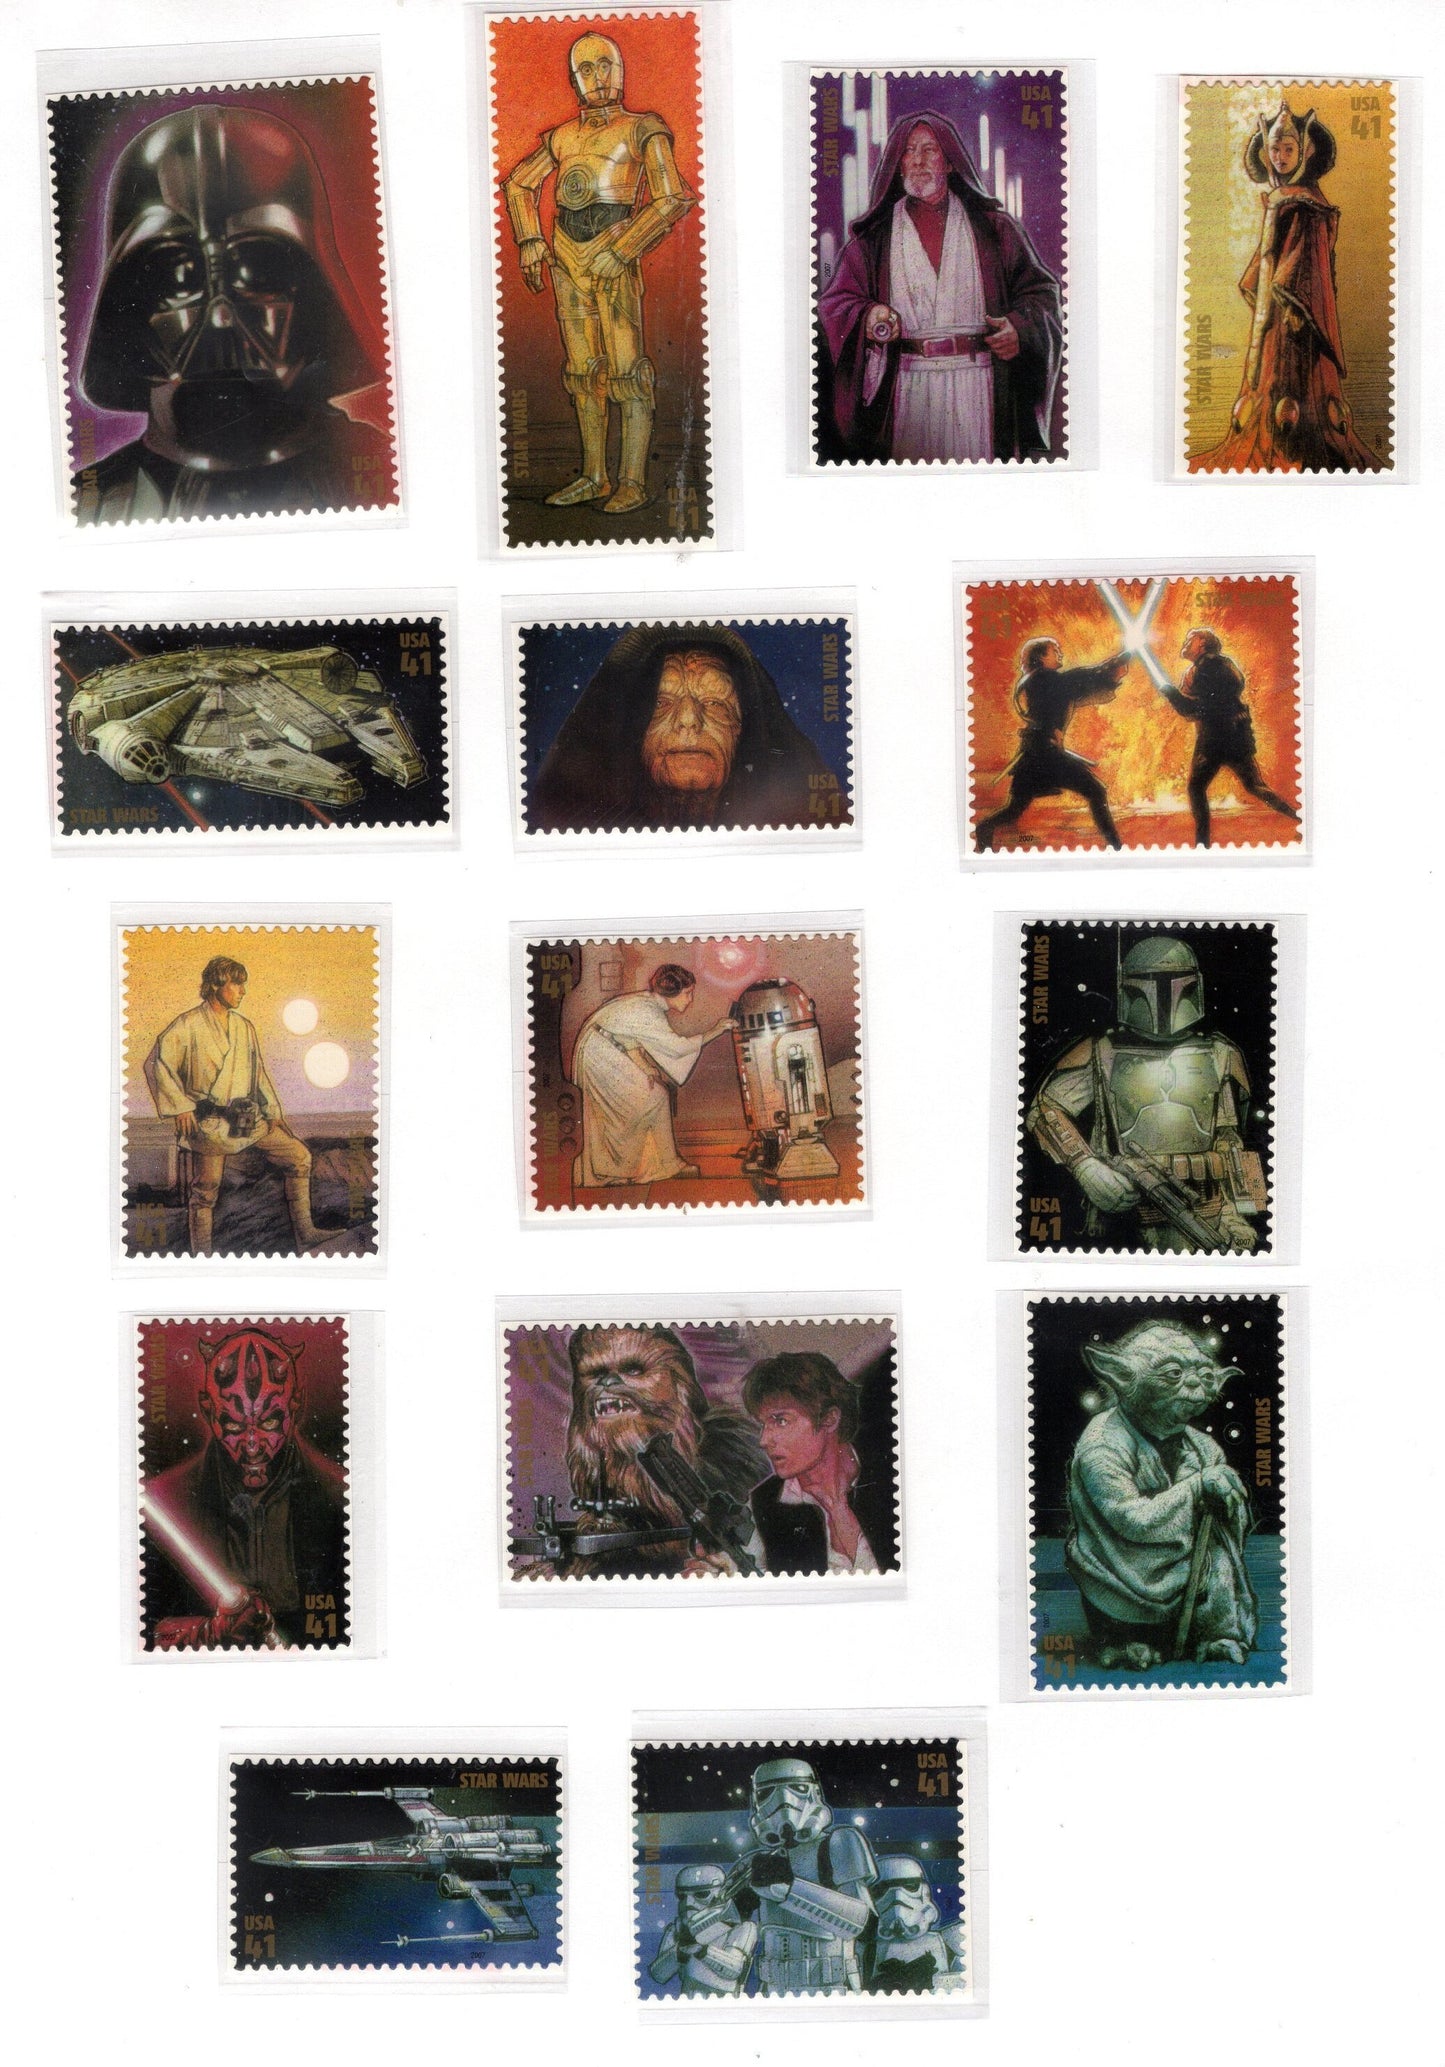 15 STAR WARS ANNIVERSARY Stamps inc YODa Fresh Bright USA Stamps - Quantity Available - Issued in 2007 - s4143a -